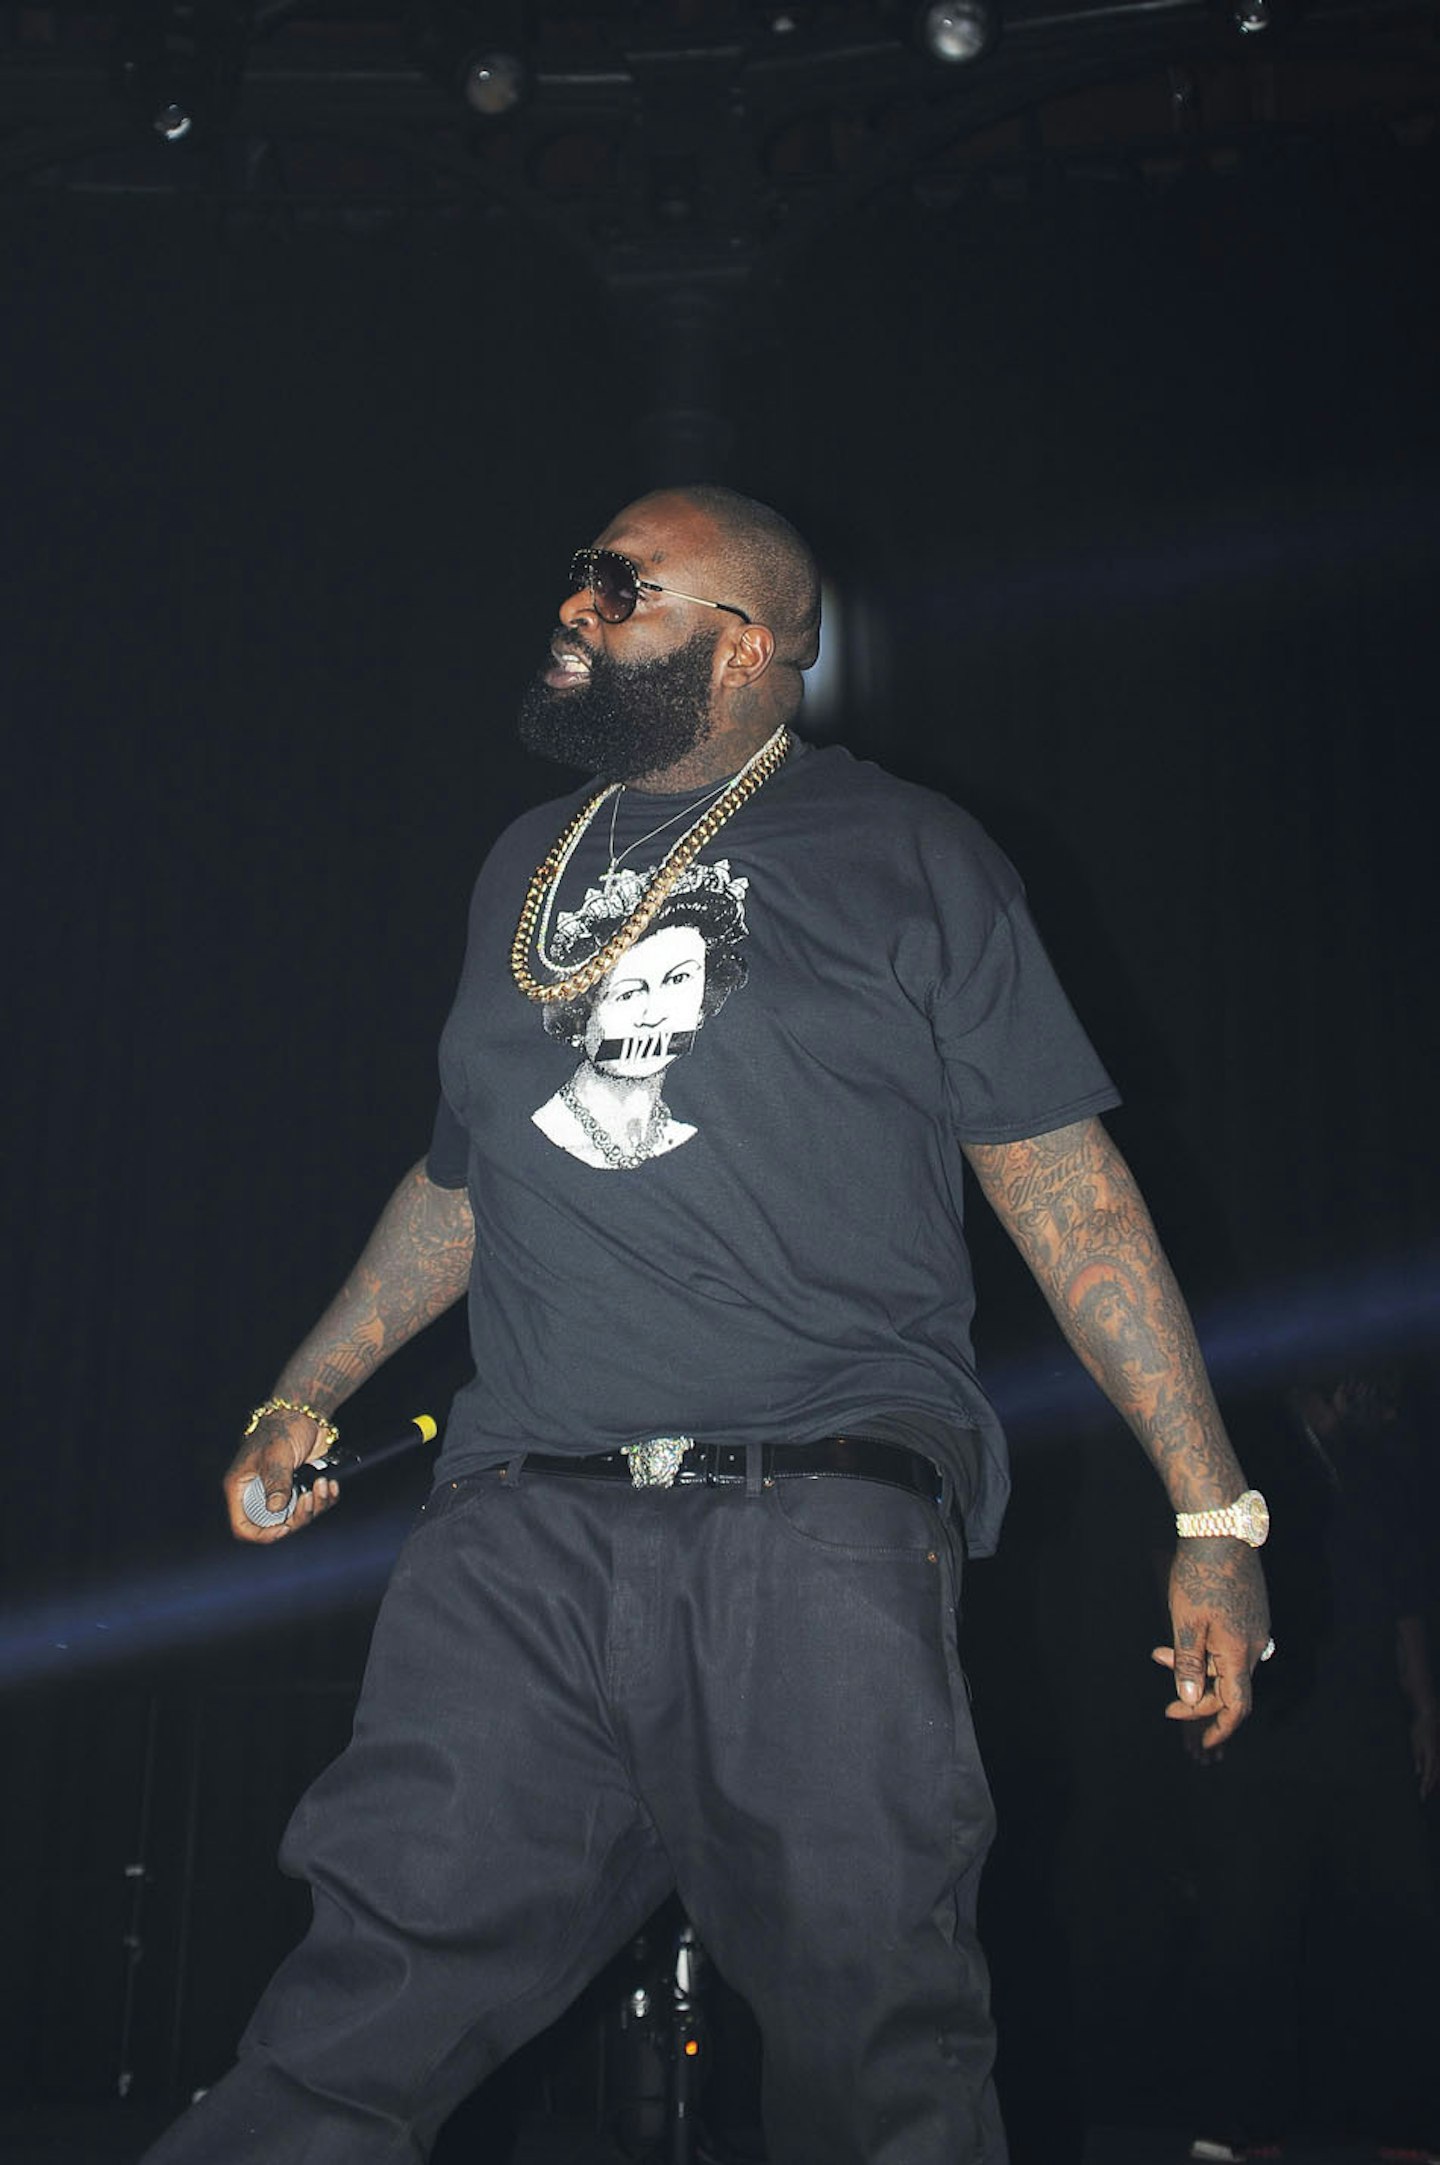 Rapper Rick Ross reportedly 'pistol-whipped' an employee.